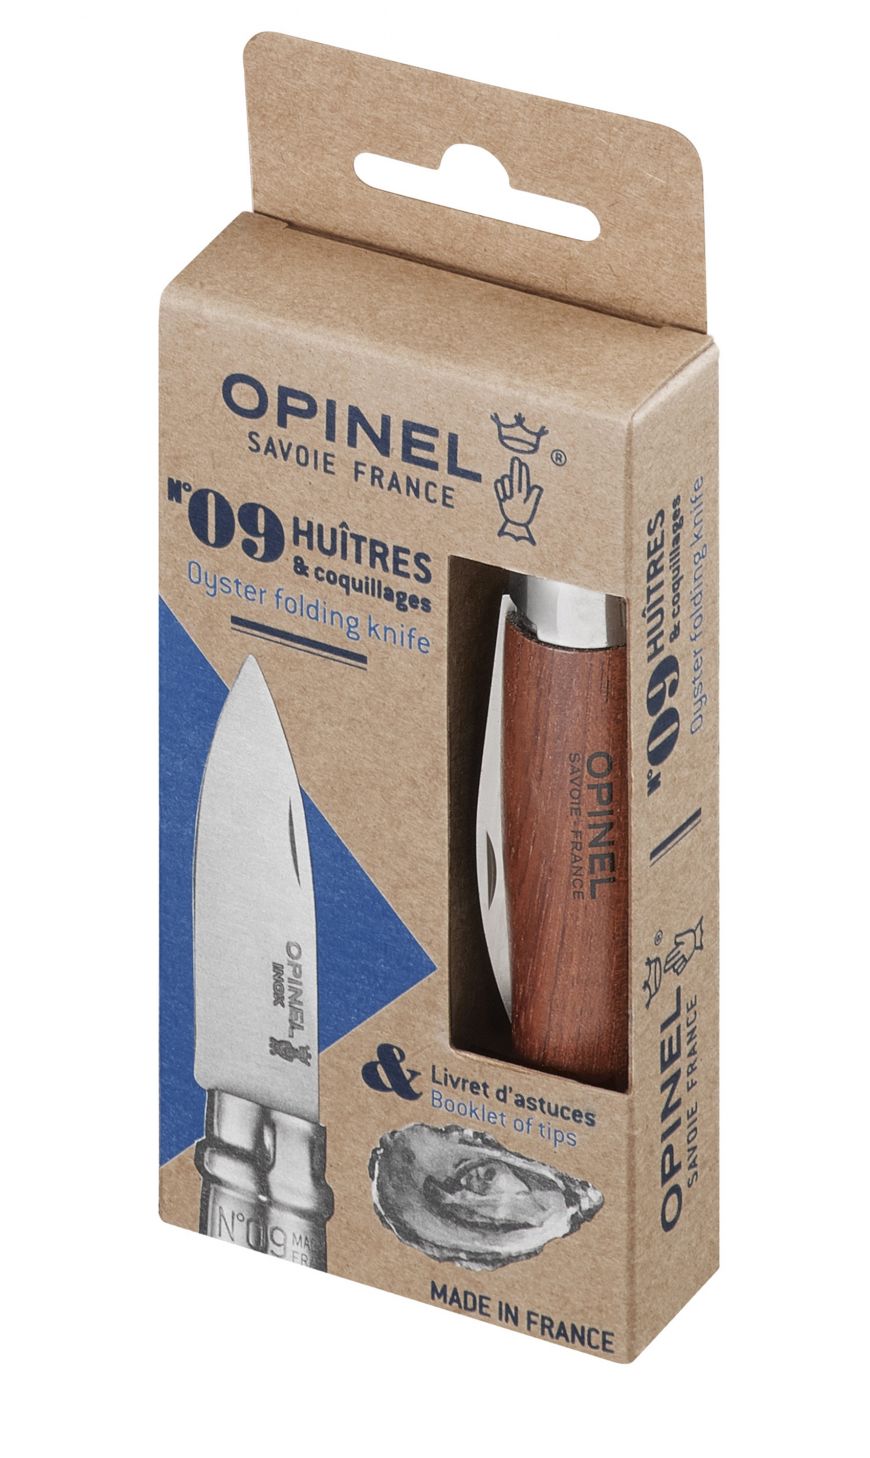 Couteau n°9 pour huîtres et coquillages - Opinel